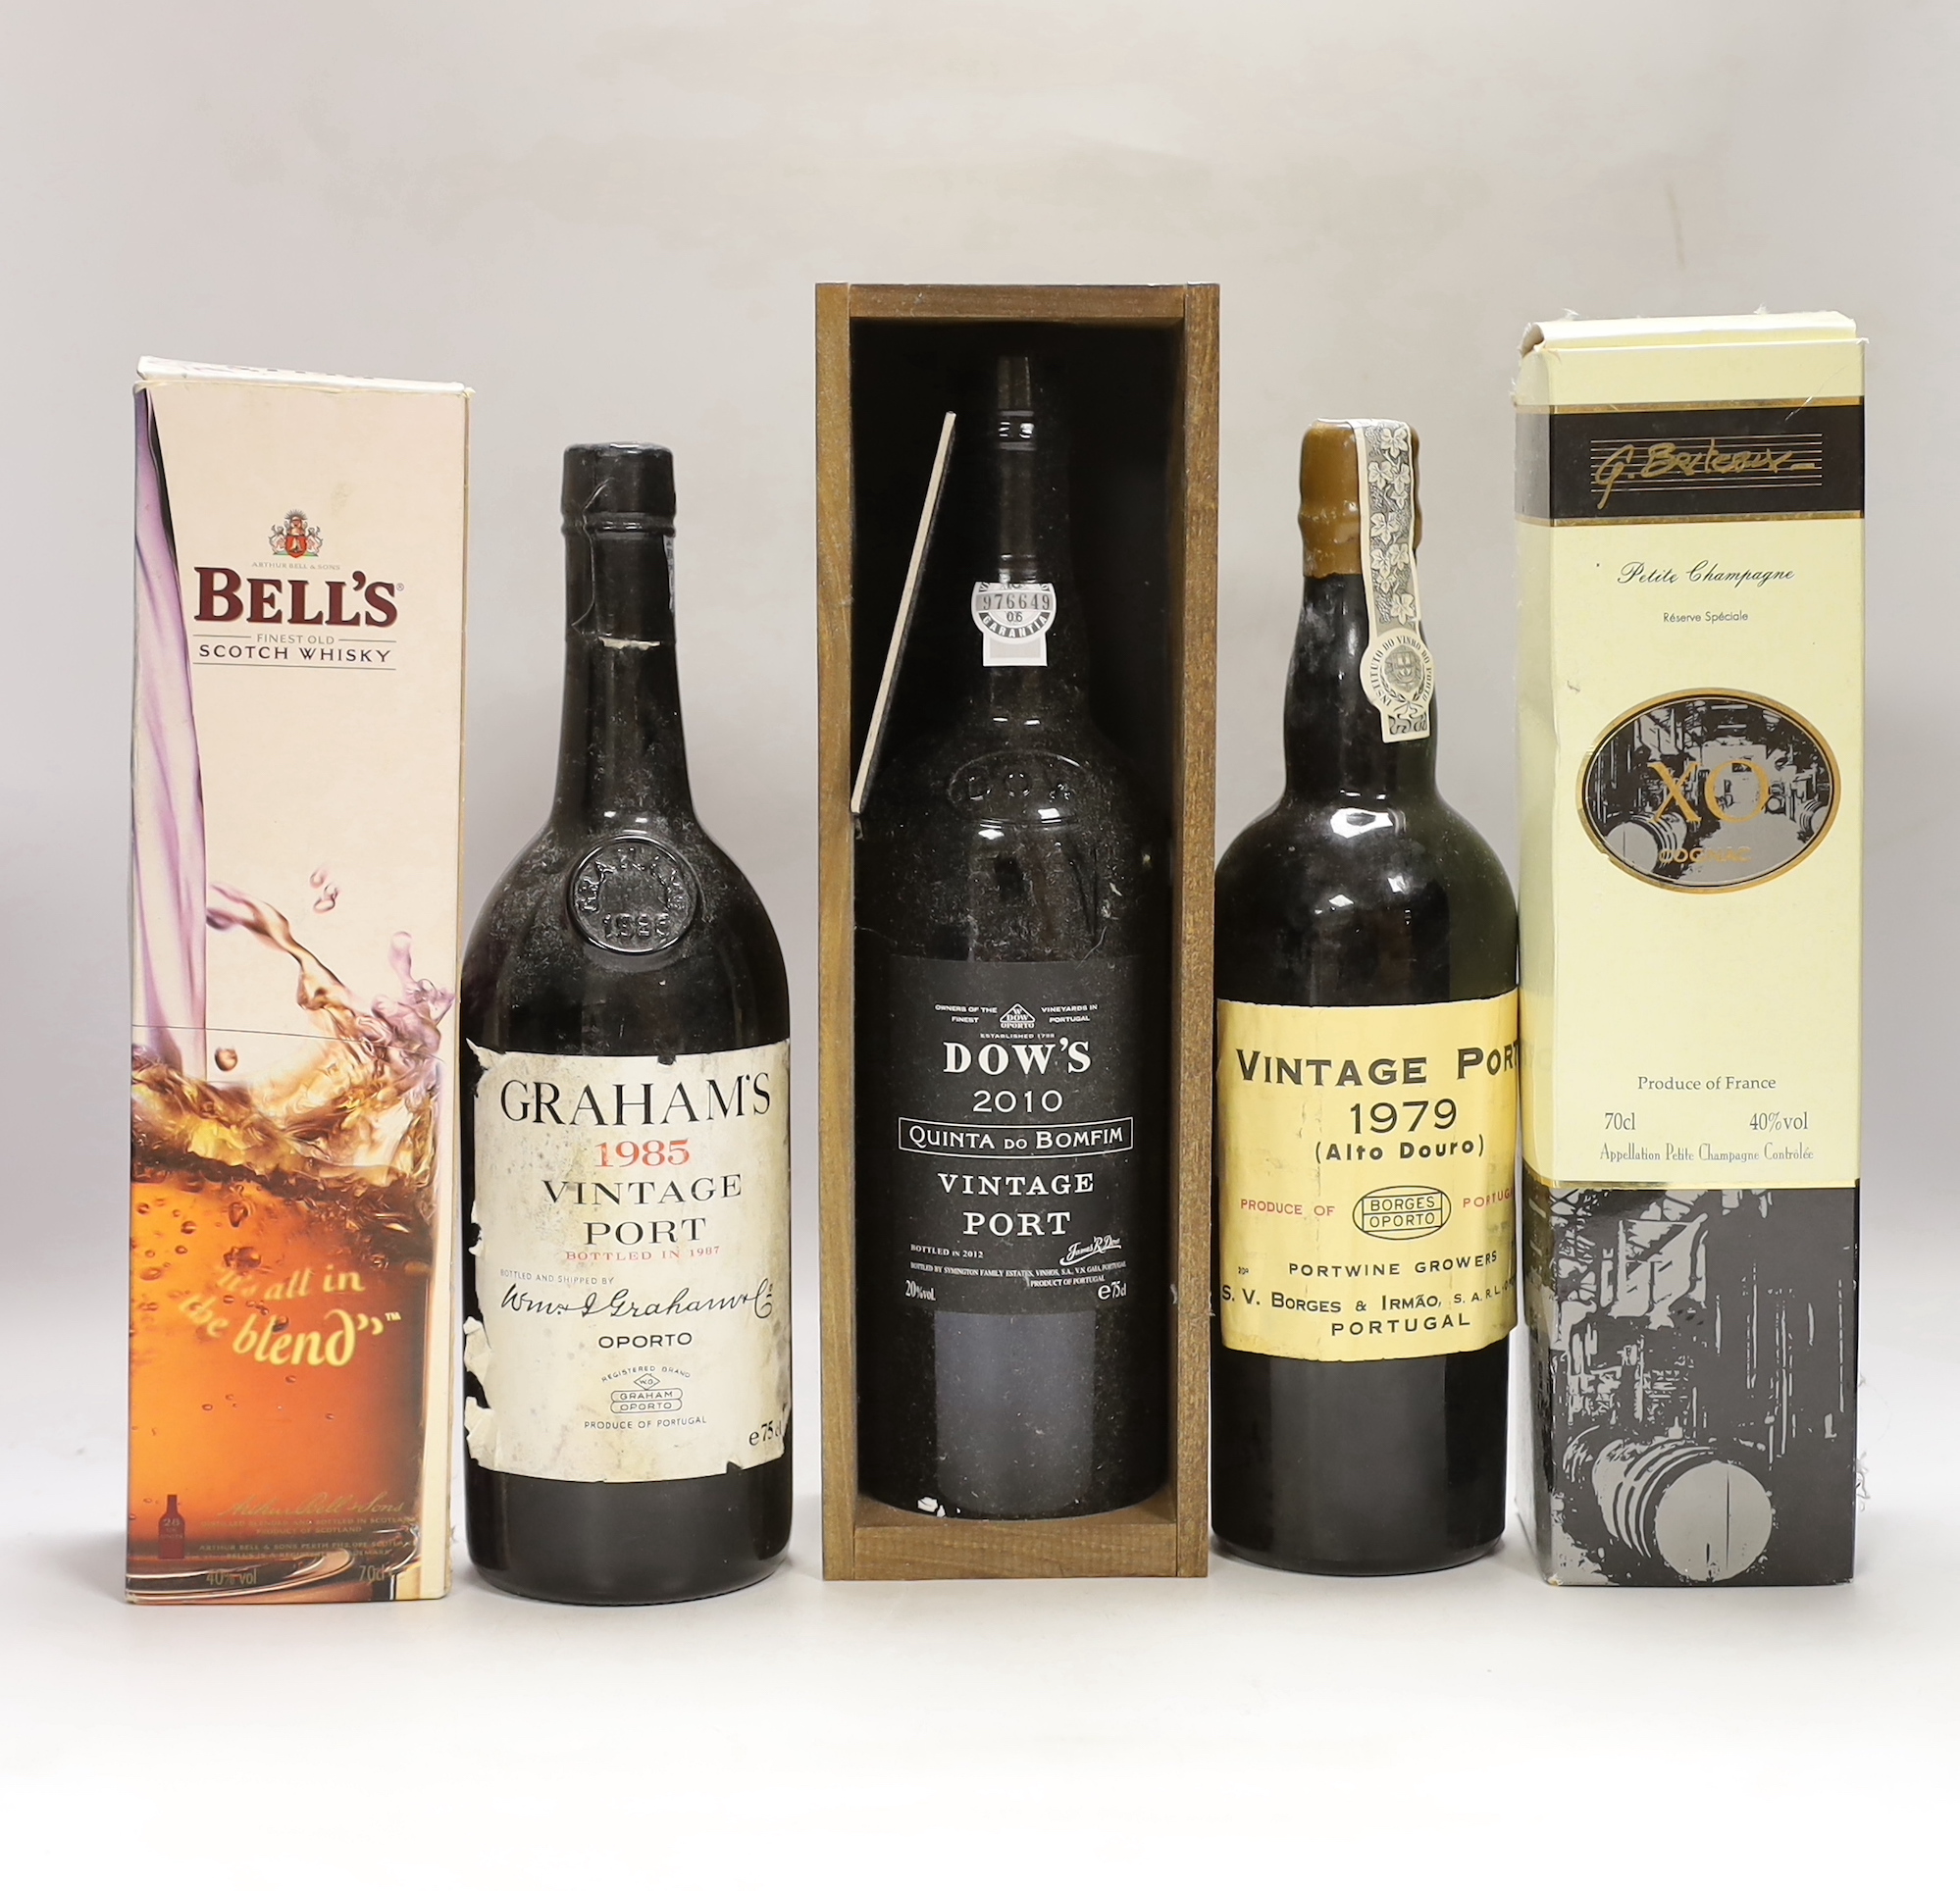 Three bottles of vintage port: A Grahams 1985, a Portuguese Alto Douro 1979, a Dow’s 2010 together with a boxed Bell’s Scotch whisky and a French XO boxed Cognac